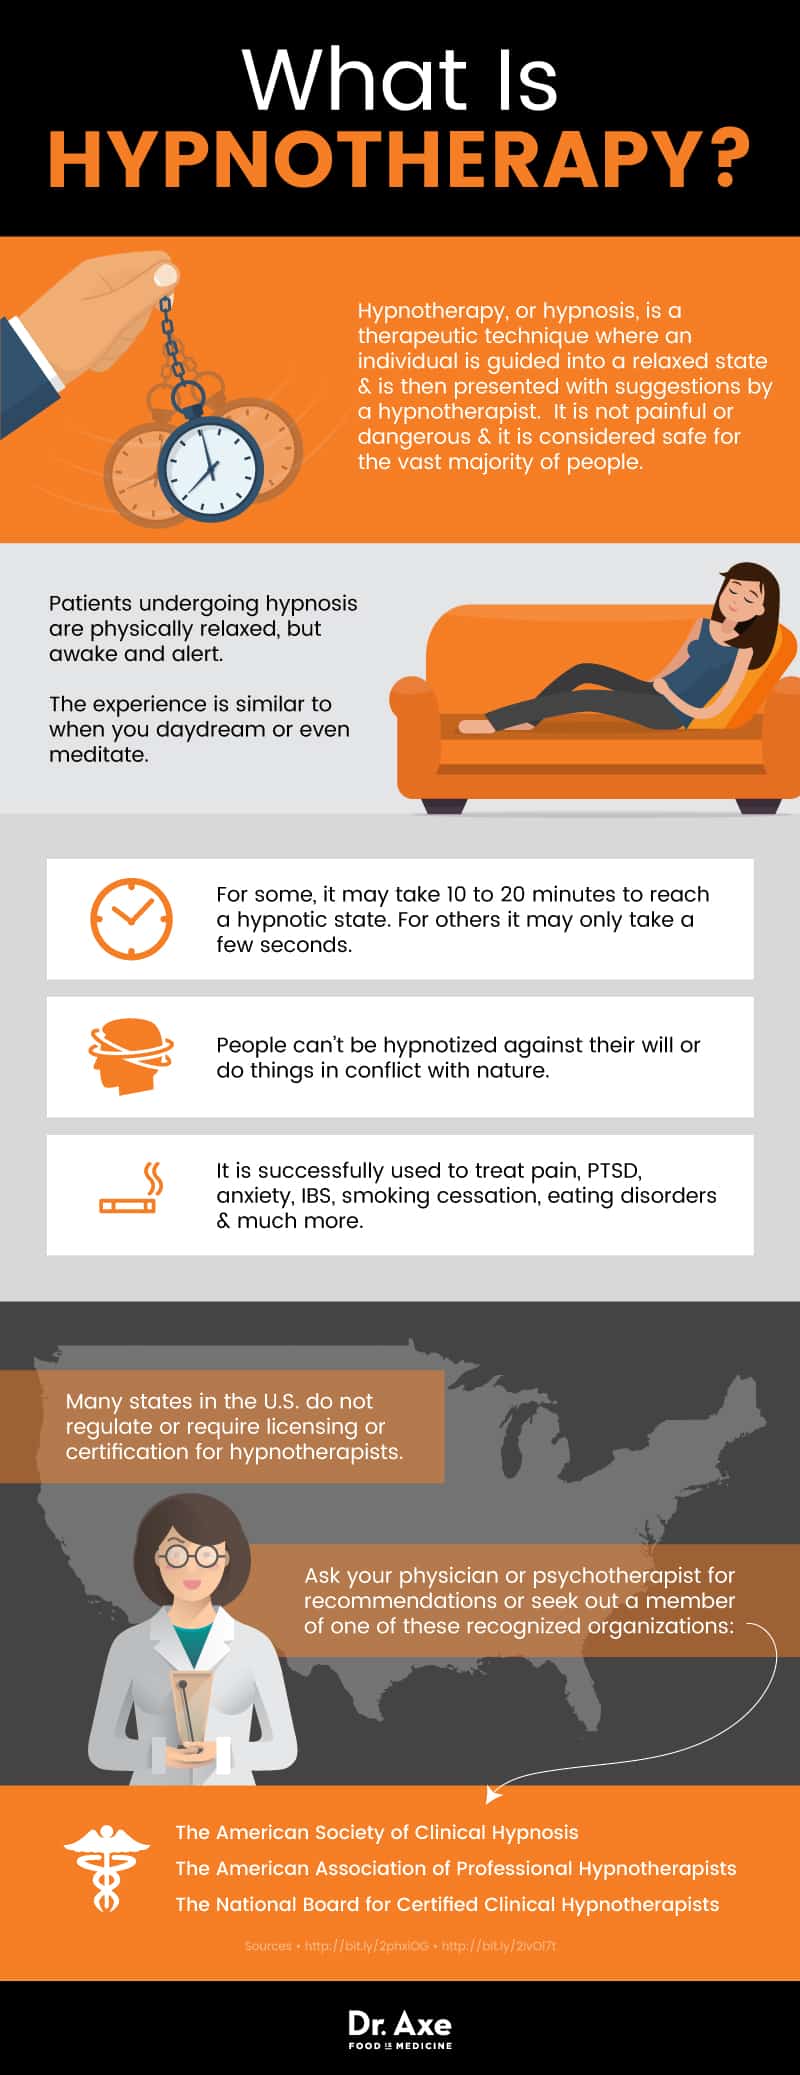 What is hypnotherapy? - Dr. Axe